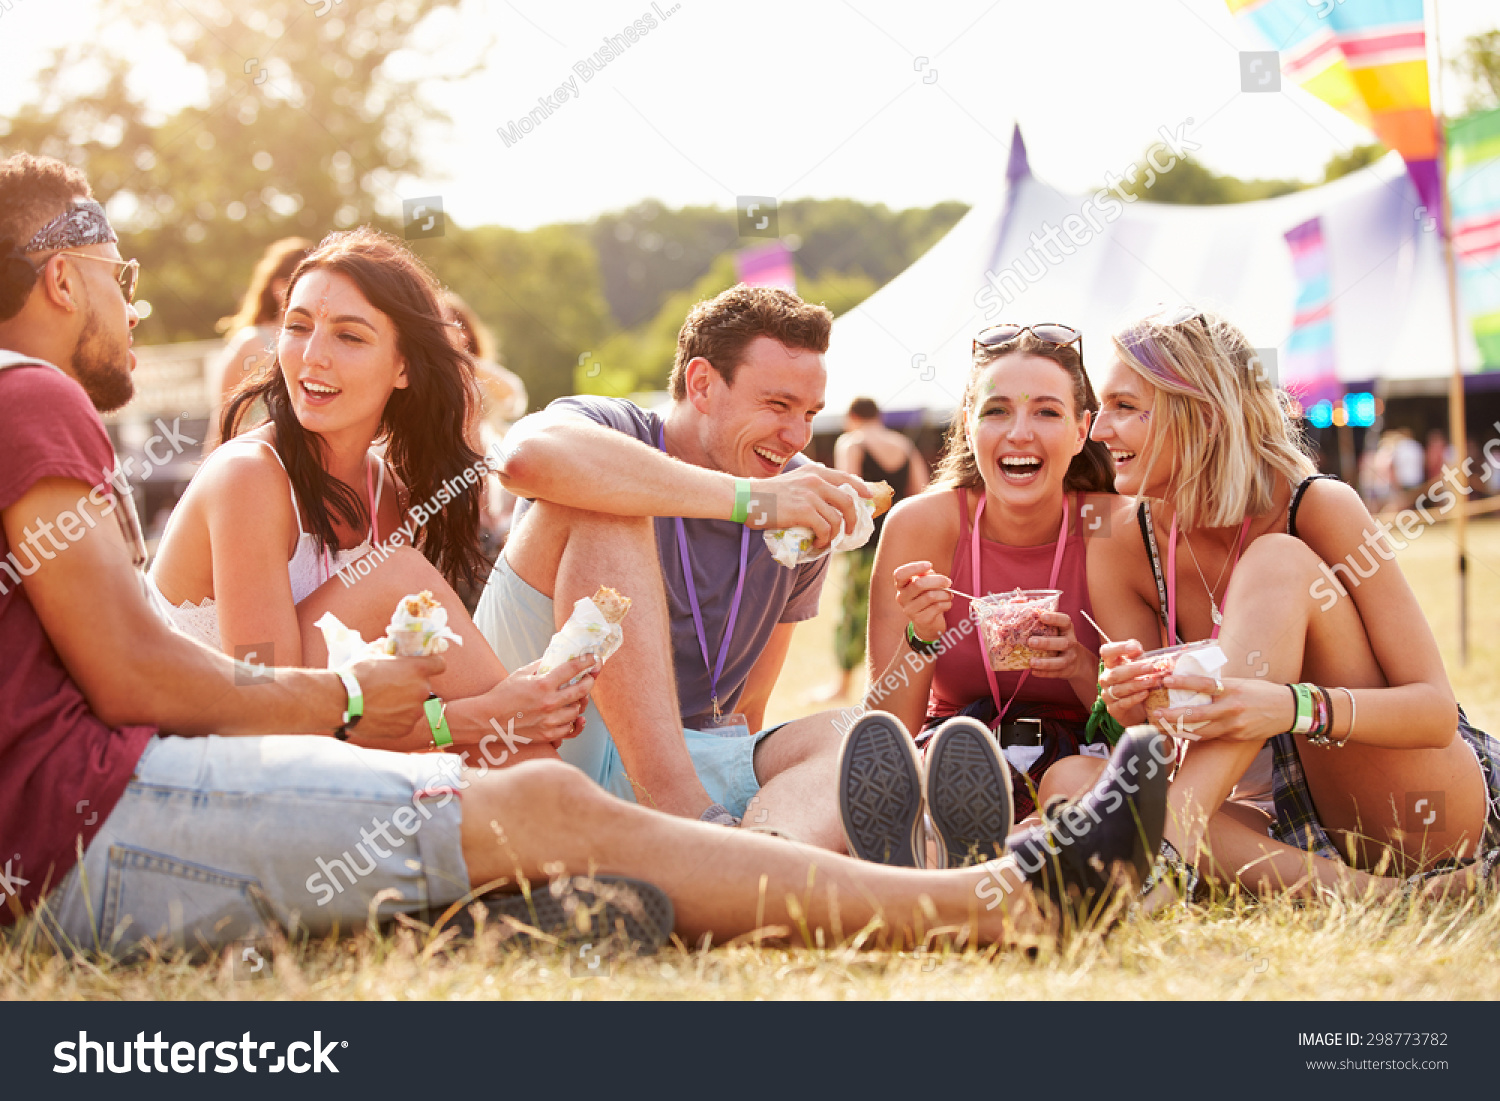 Friends sitting on the grass eating at a music festival #298773782